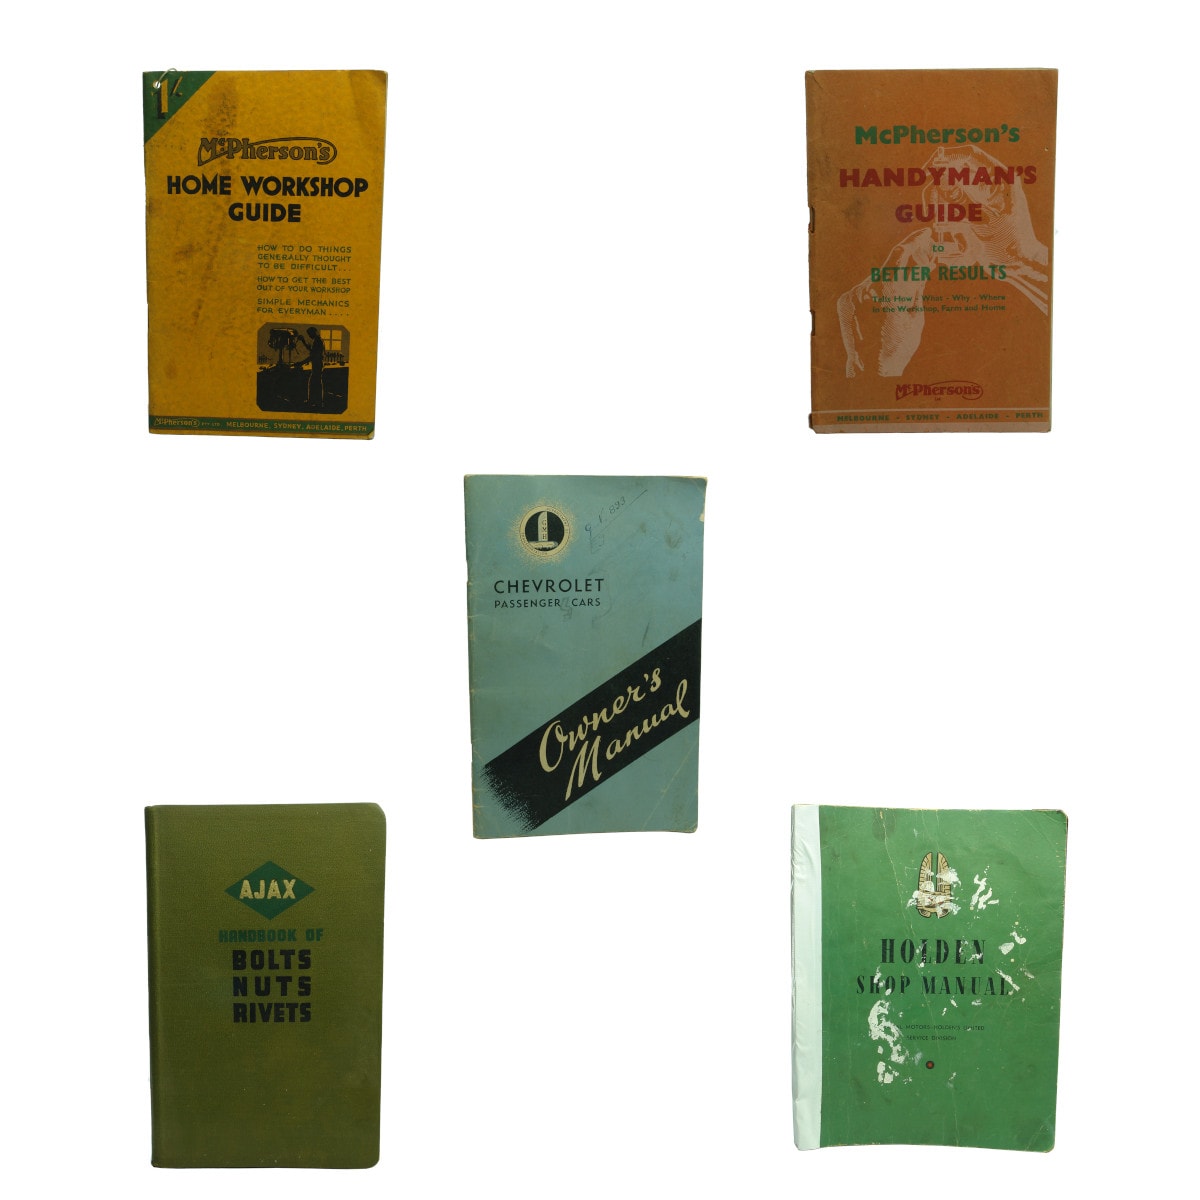 Five Car and Workshop Manuals and Guides. Holden, GMH, Chevrolet & McPherson's.